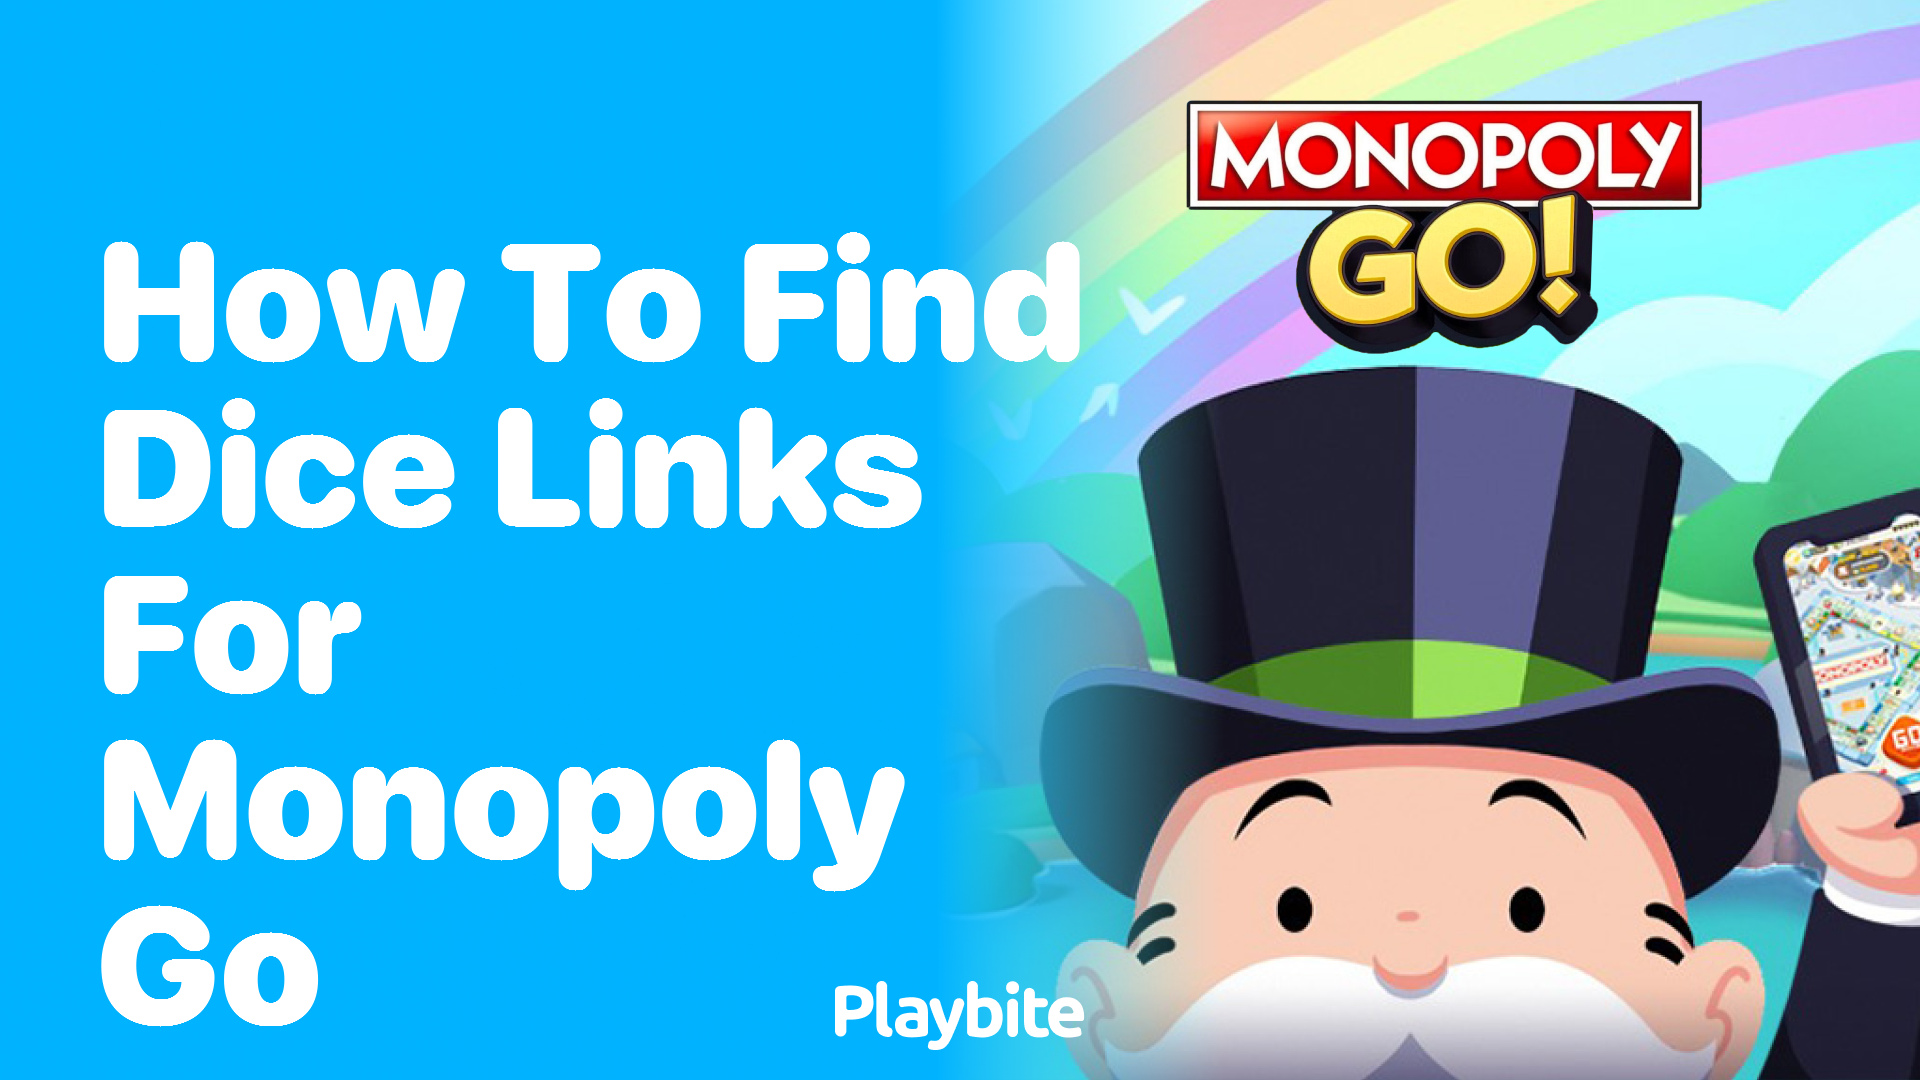 How to Find Dice Links for Monopoly Go